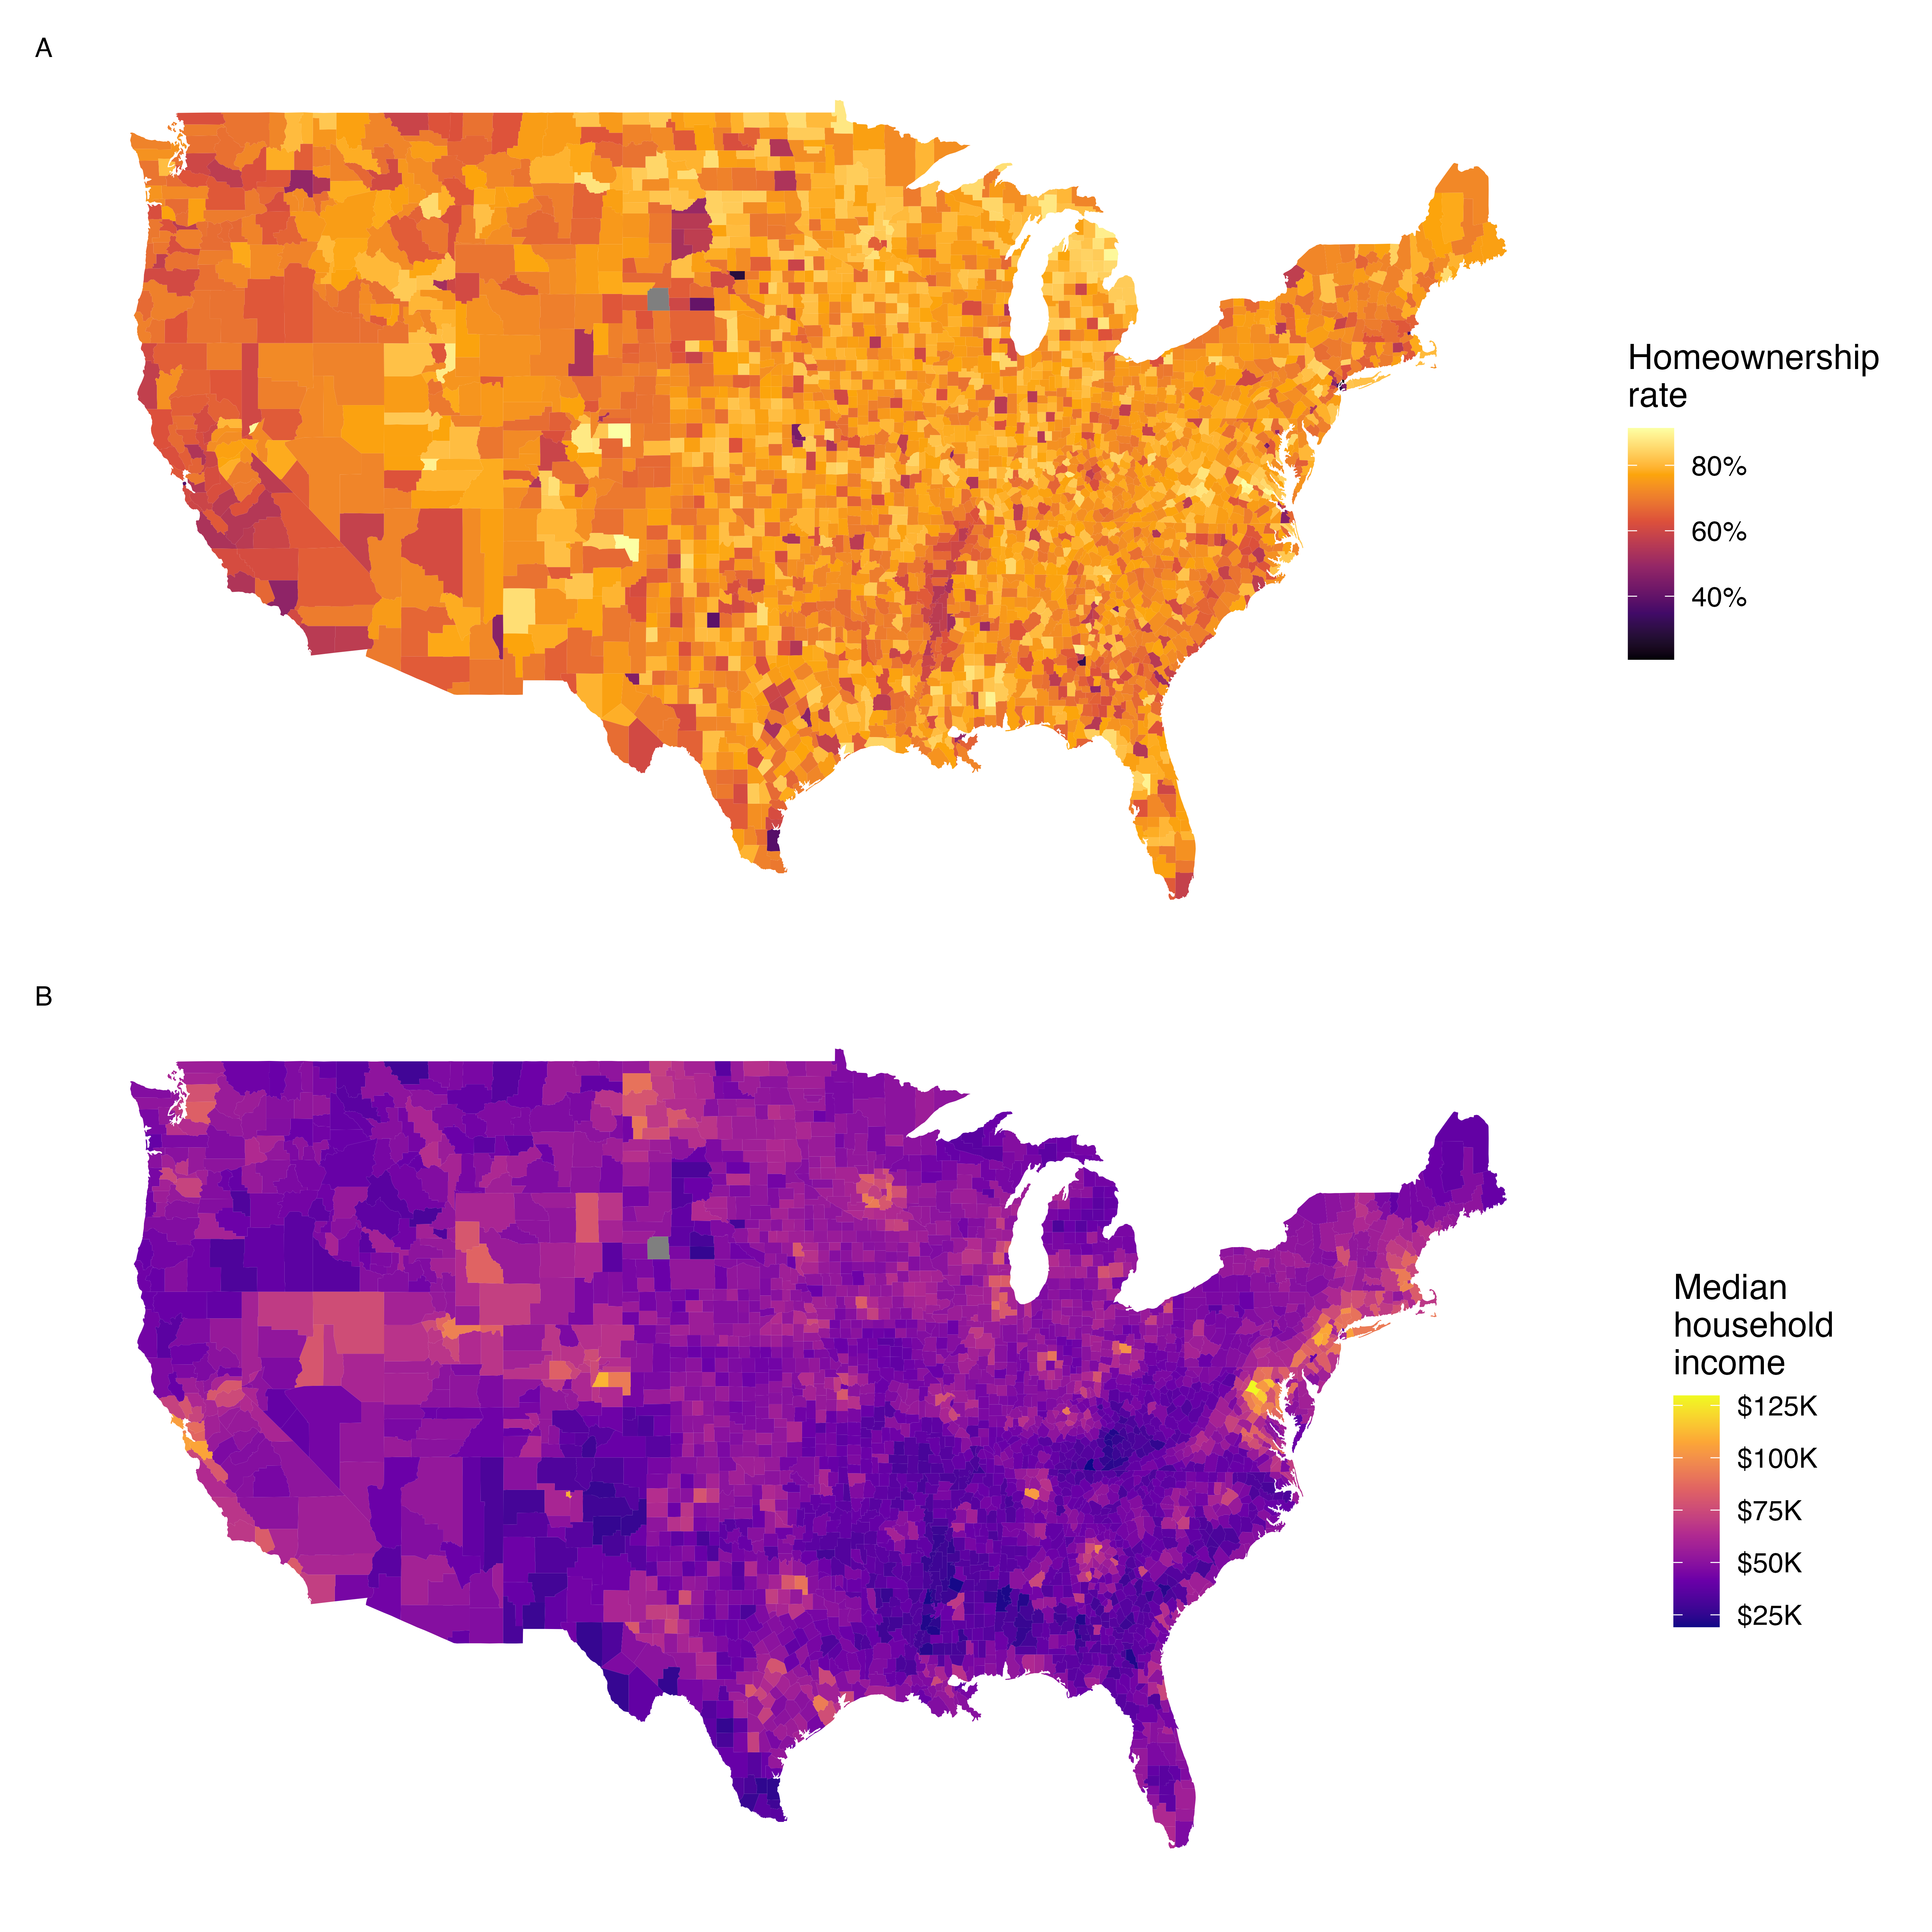 Two intensity map (also called heatmaps) of the United States. Each county is colored by the value of a variables.  In the top plot, the county is colored by home ownership ratee which is lowest on the west coast. In the bottom plot, the county is colored by median household income which is highest in the Bay Area and along the New England coast.